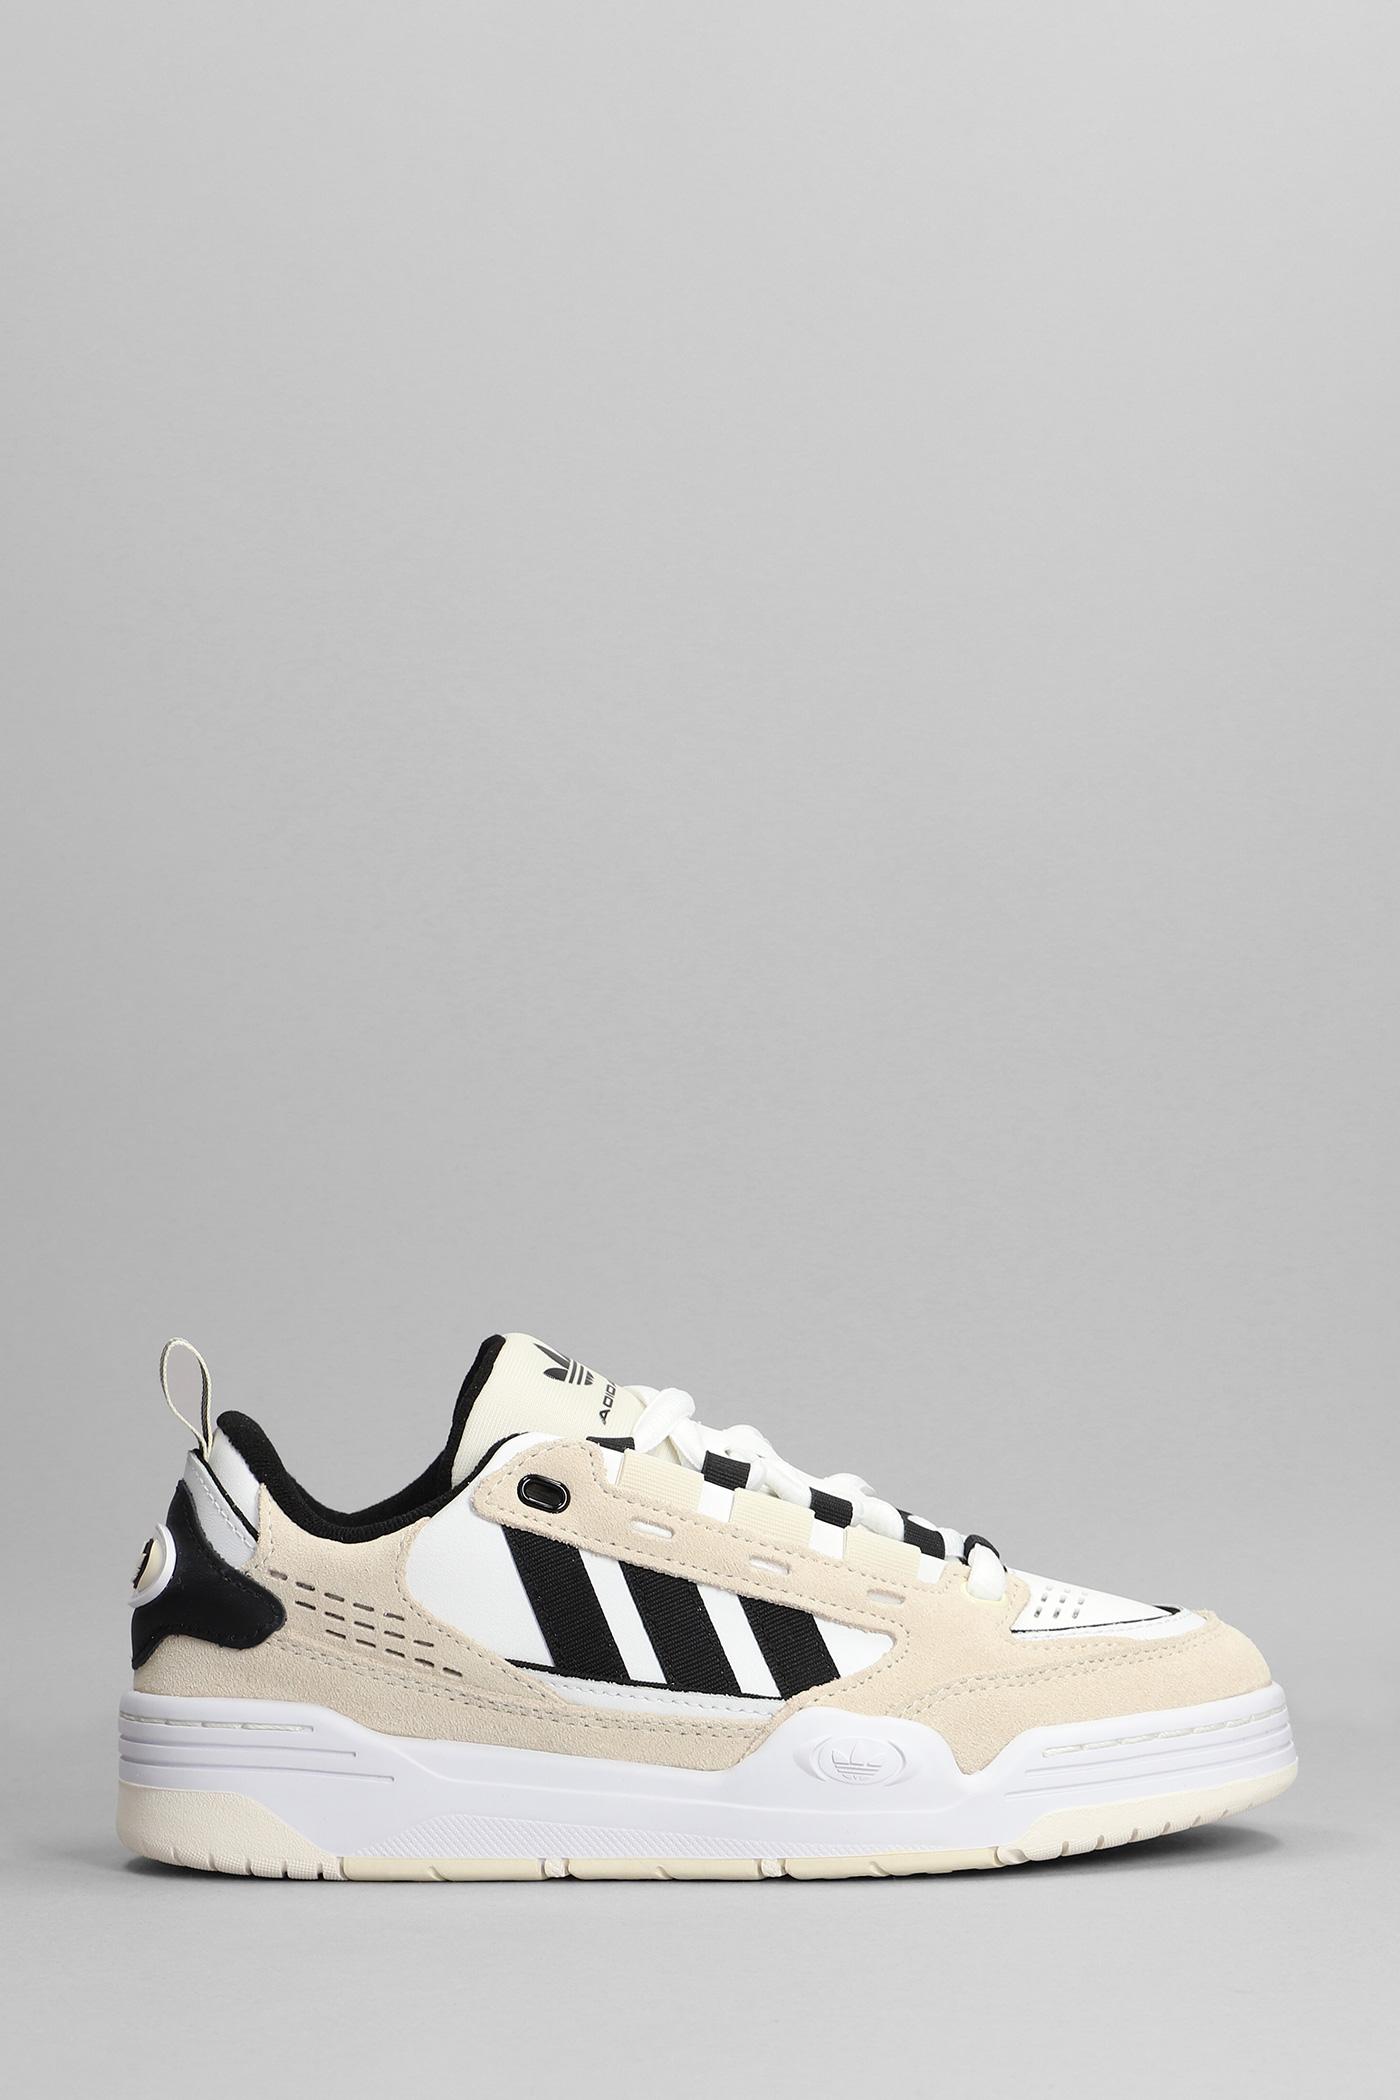 adidas Adi2000 W Sneakers In Beige Suede And Fabric in Natural | Lyst | Sneaker